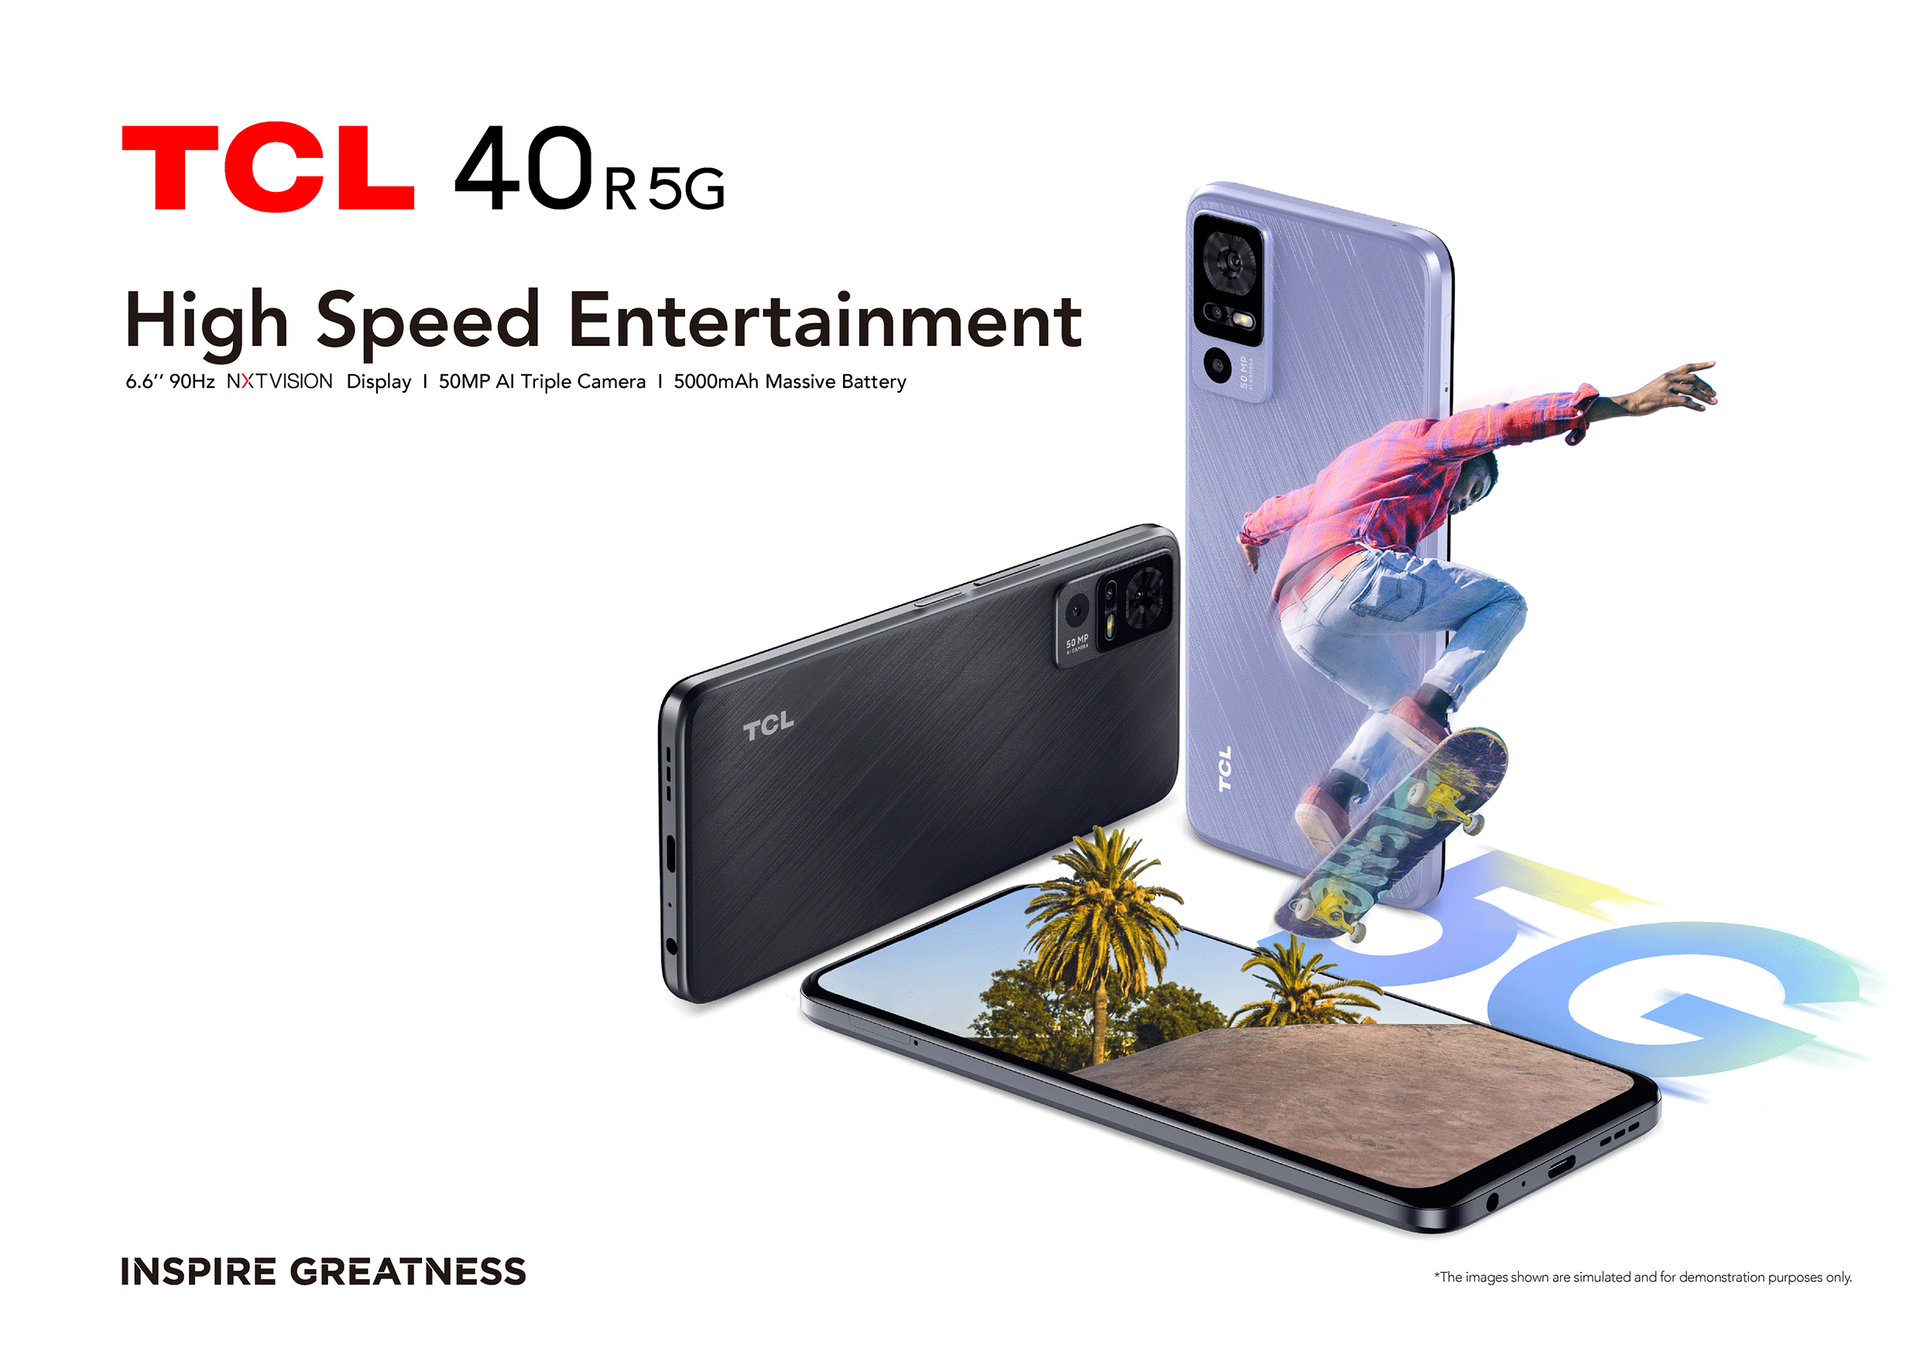 TCL 40 R